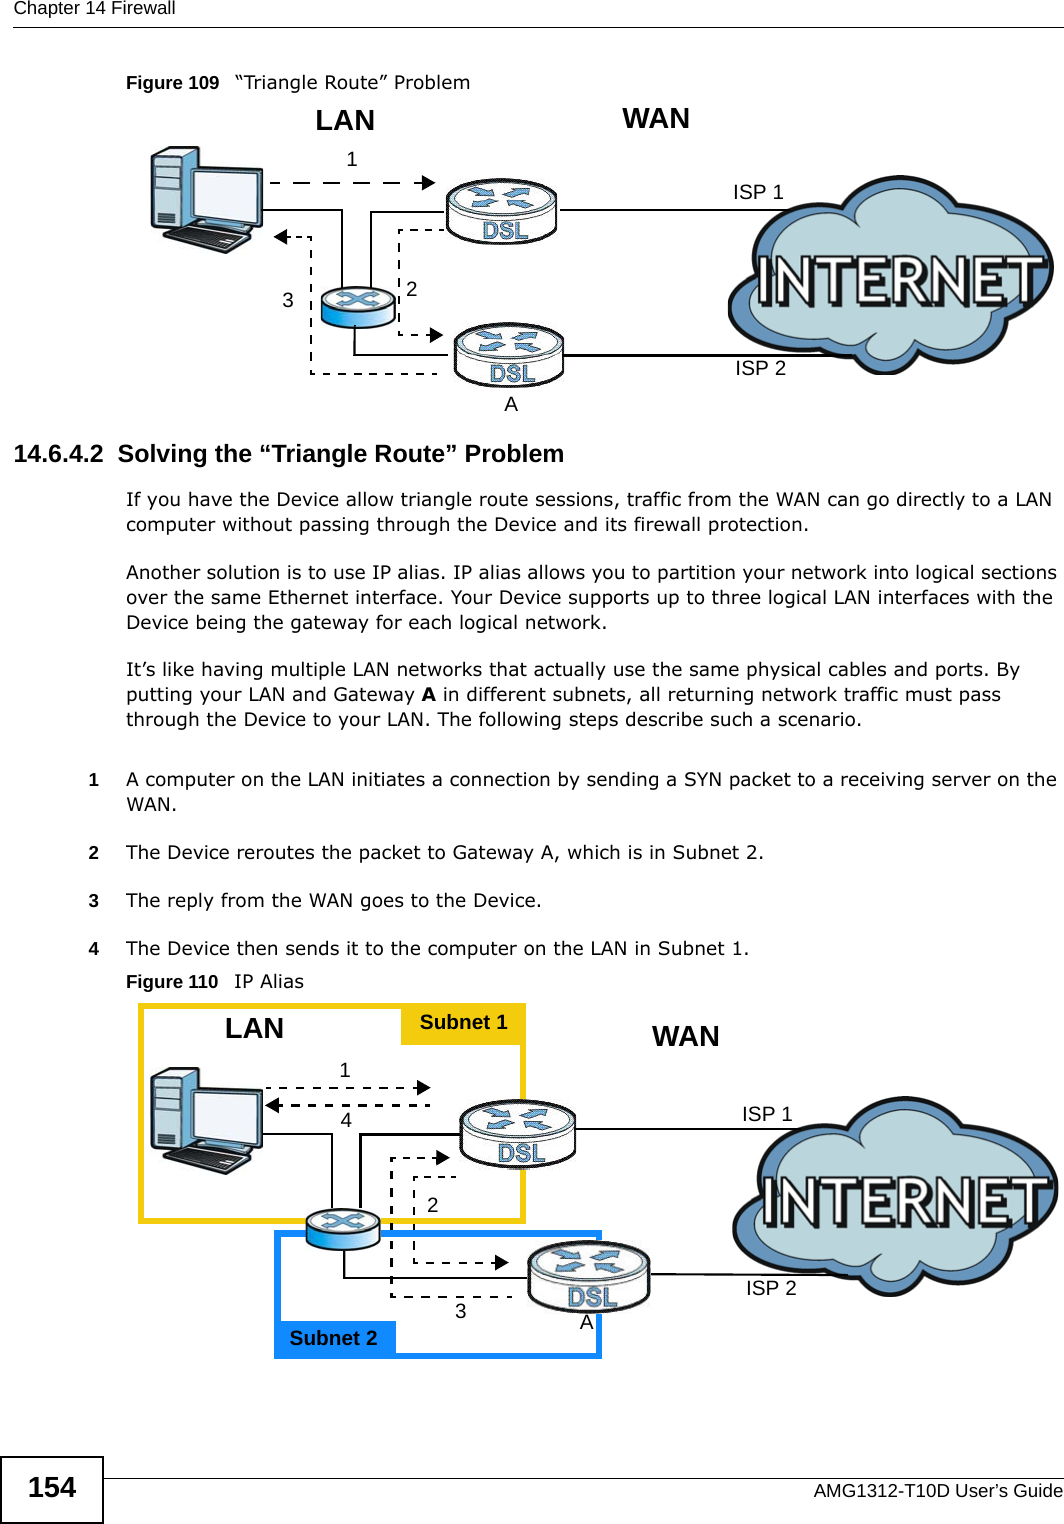 Chapter 14 FirewallAMG1312-T10D User’s Guide154Figure 109   “Triangle Route” Problem14.6.4.2  Solving the “Triangle Route” ProblemIf you have the Device allow triangle route sessions, traffic from the WAN can go directly to a LAN computer without passing through the Device and its firewall protection. Another solution is to use IP alias. IP alias allows you to partition your network into logical sections over the same Ethernet interface. Your Device supports up to three logical LAN interfaces with the Device being the gateway for each logical network. It’s like having multiple LAN networks that actually use the same physical cables and ports. By putting your LAN and Gateway A in different subnets, all returning network traffic must pass through the Device to your LAN. The following steps describe such a scenario.1A computer on the LAN initiates a connection by sending a SYN packet to a receiving server on the WAN. 2The Device reroutes the packet to Gateway A, which is in Subnet 2. 3The reply from the WAN goes to the Device. 4The Device then sends it to the computer on the LAN in Subnet 1.Figure 110   IP Alias123WANLANAISP 1ISP 2123LANAISP 1ISP 24WANSubnet 1Subnet 2